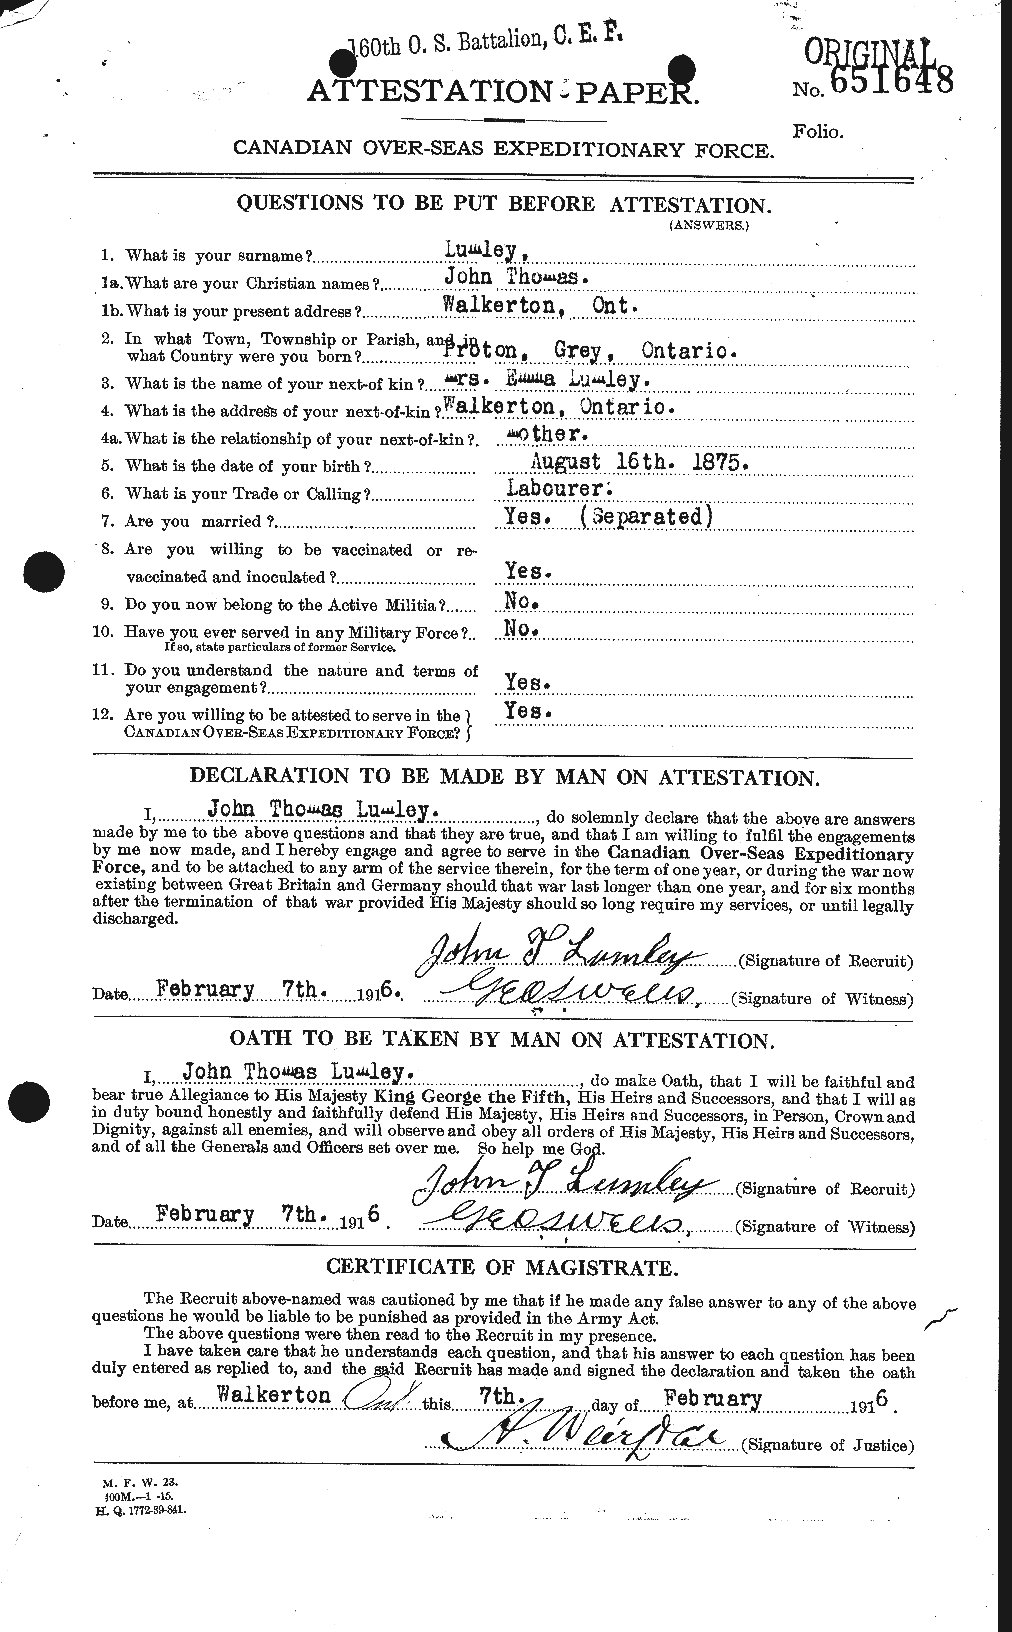 Personnel Records of the First World War - CEF 470810a